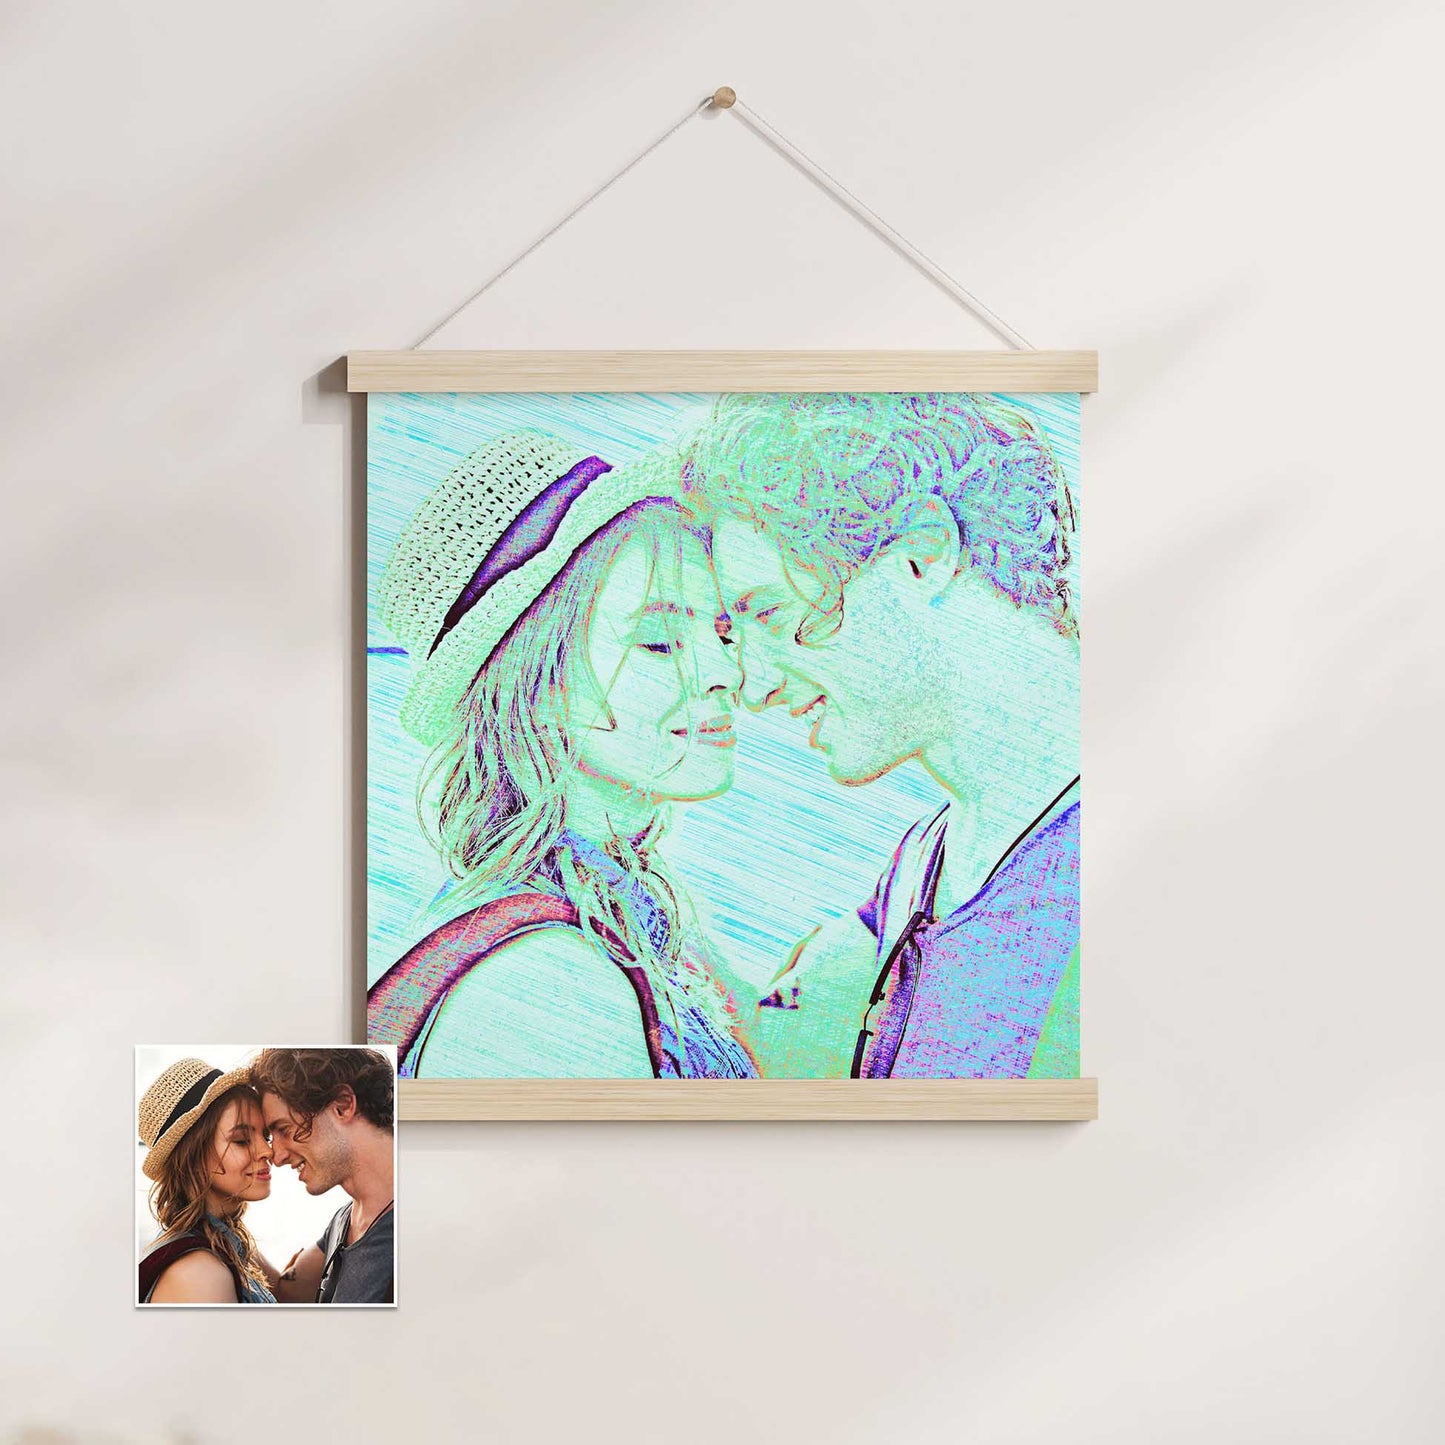 Add a pop of vibrant blue to your walls with the Personalised Blue Drawing Poster Hanger. This cool and fresh wall art features a drawing created from your photo, enhanced with a pencil effect for a unique touch